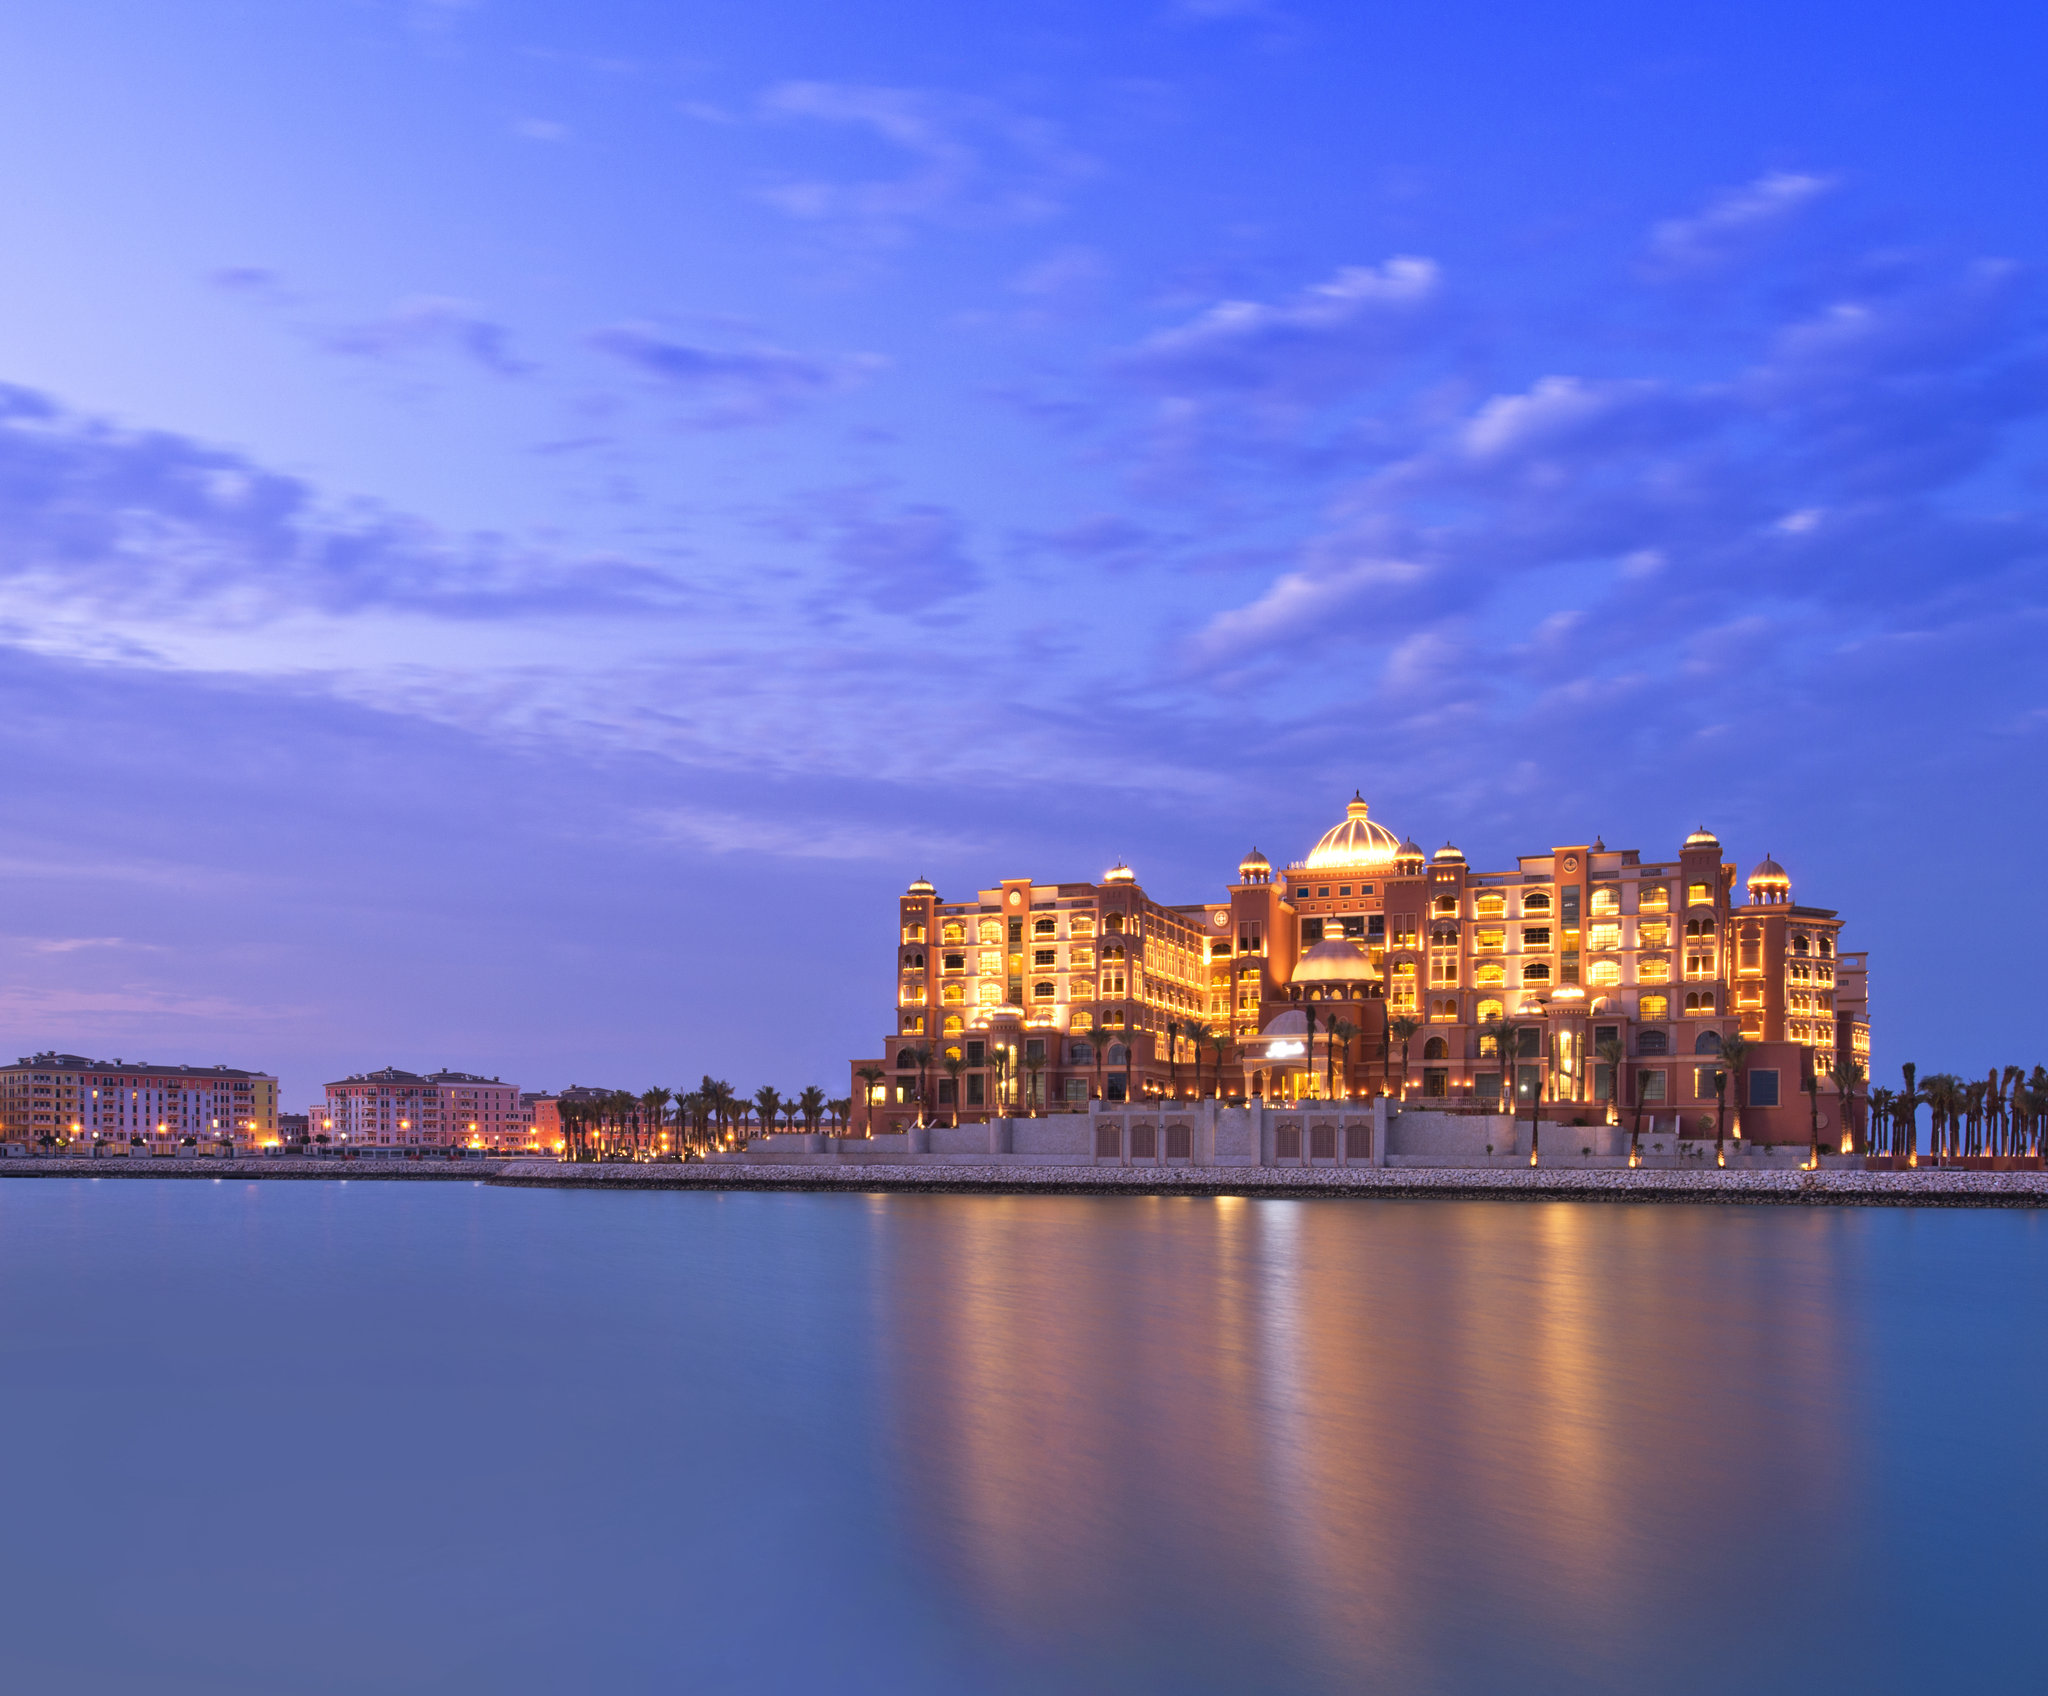 Karim Tayach appointed as the new Cluster General Manager of Kempinski Properties in Doha